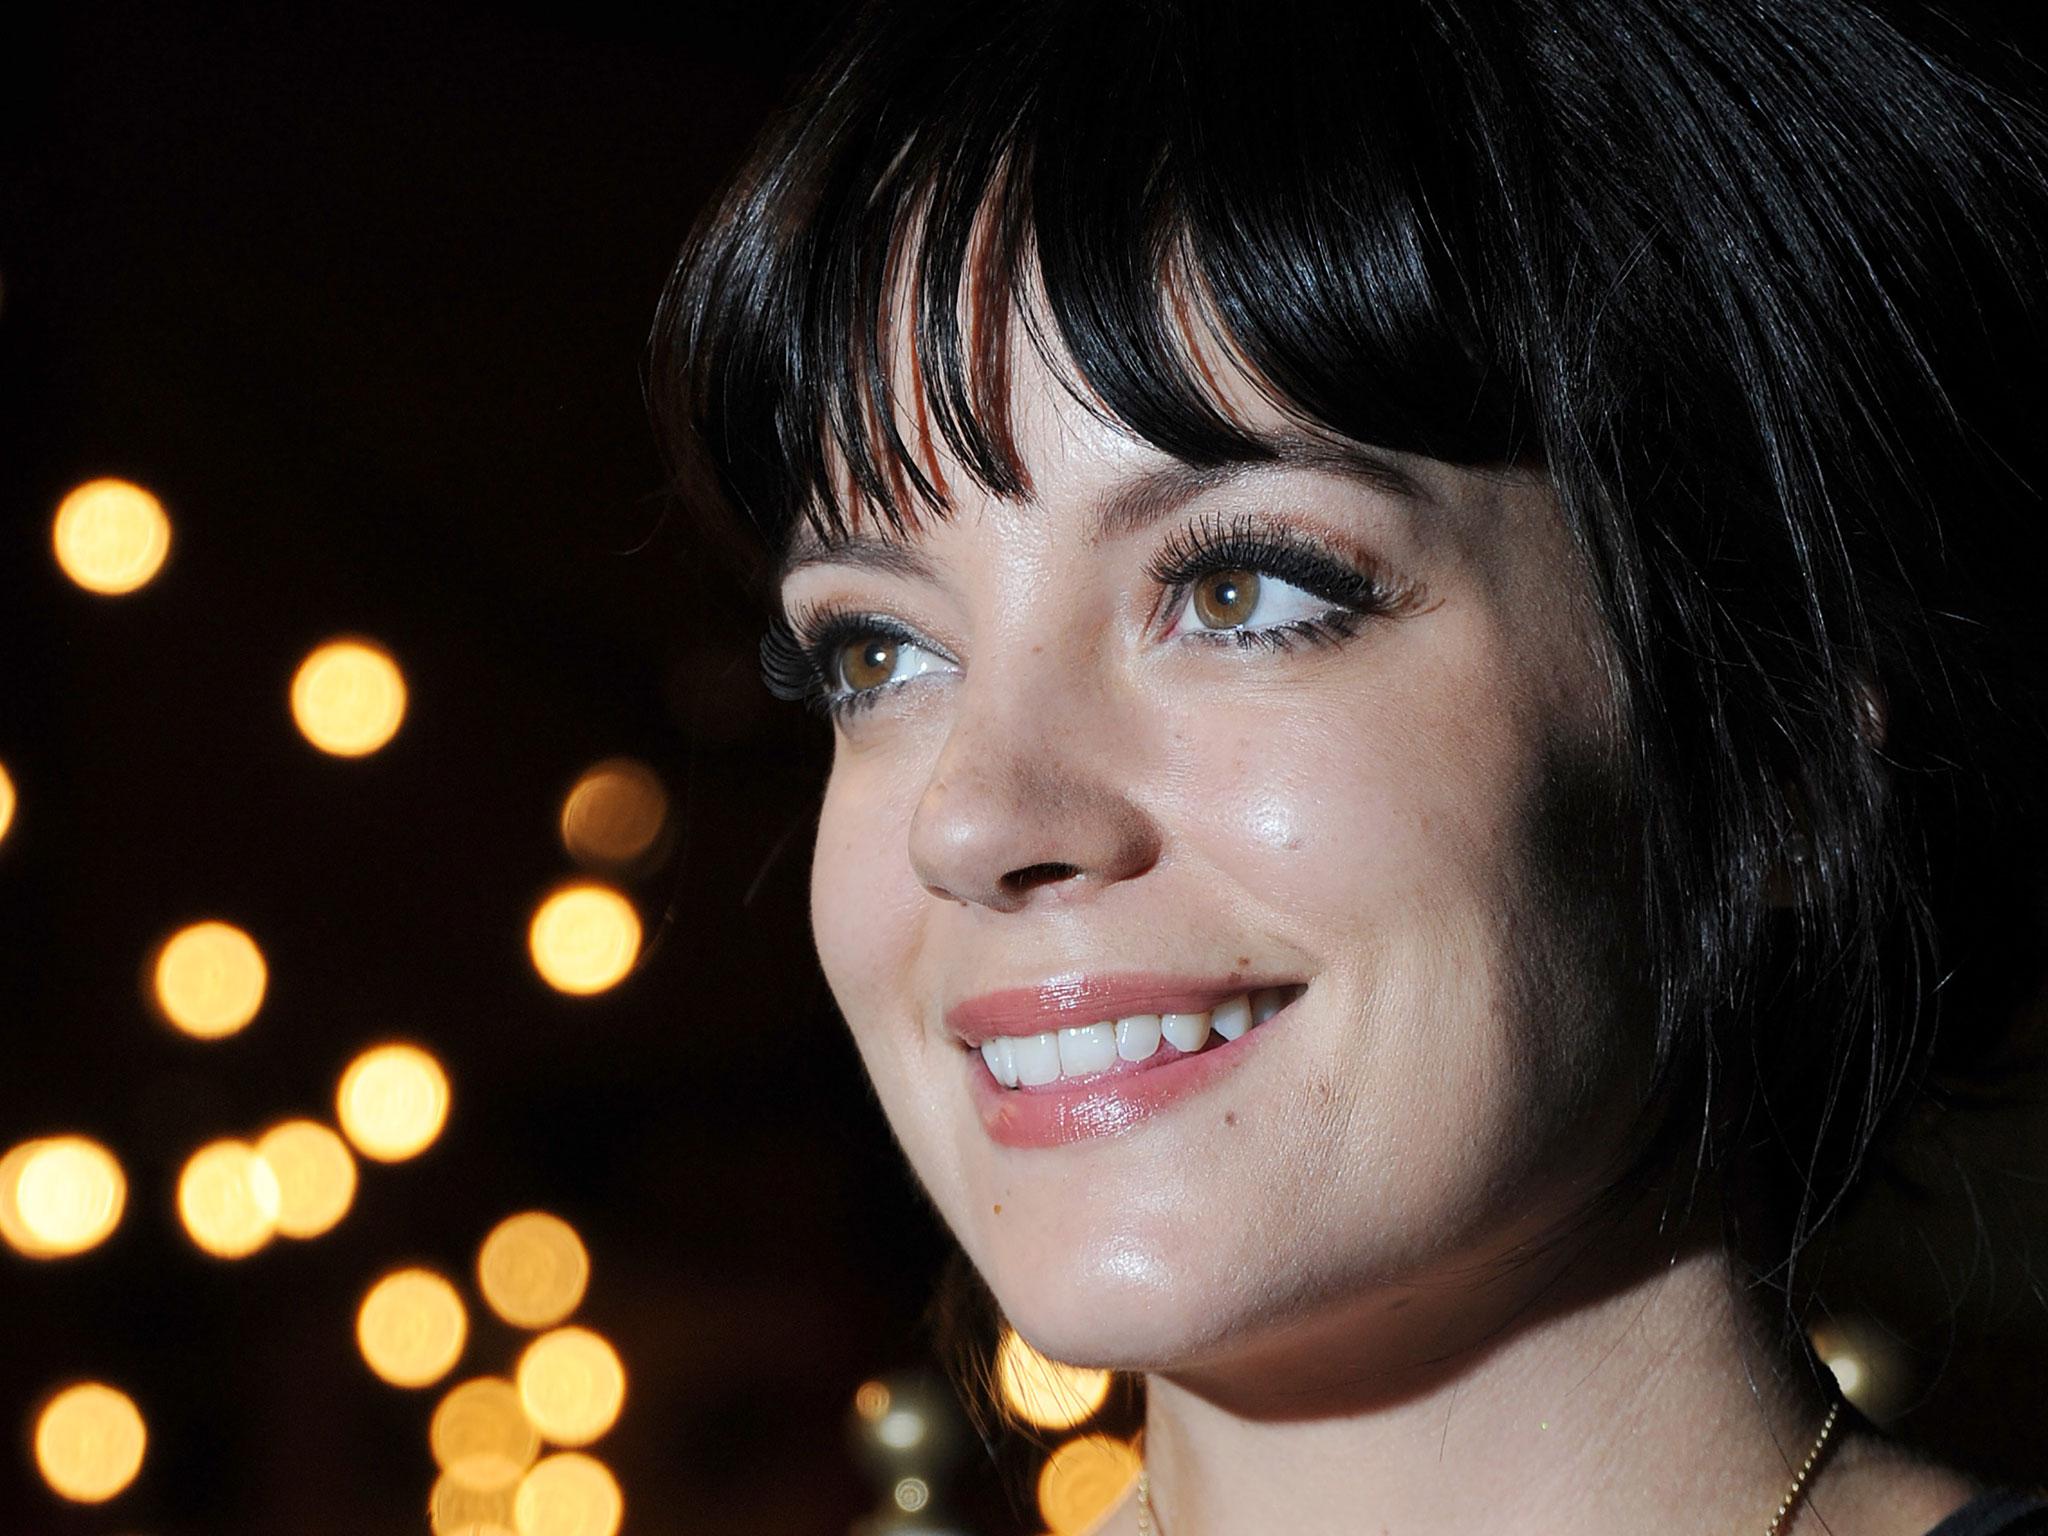 Lily Allen was asked to play Theon Greyjoy's sister Yara on Game of Thrones, opposite her real-life brother Alfie